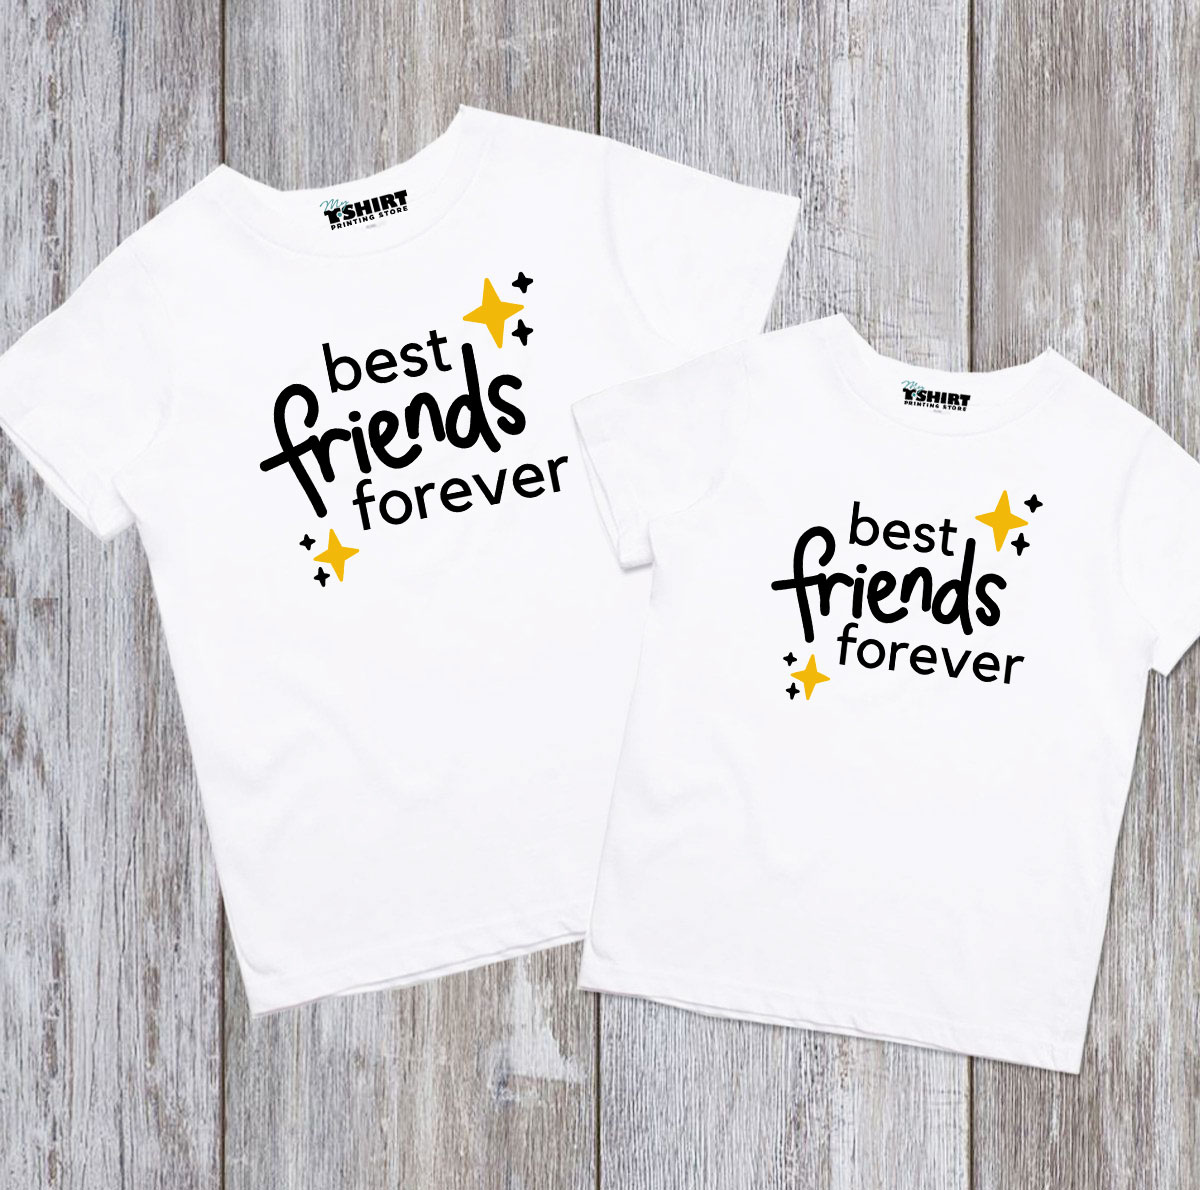 Friends Forever Kids - T-Shirt Printing Store